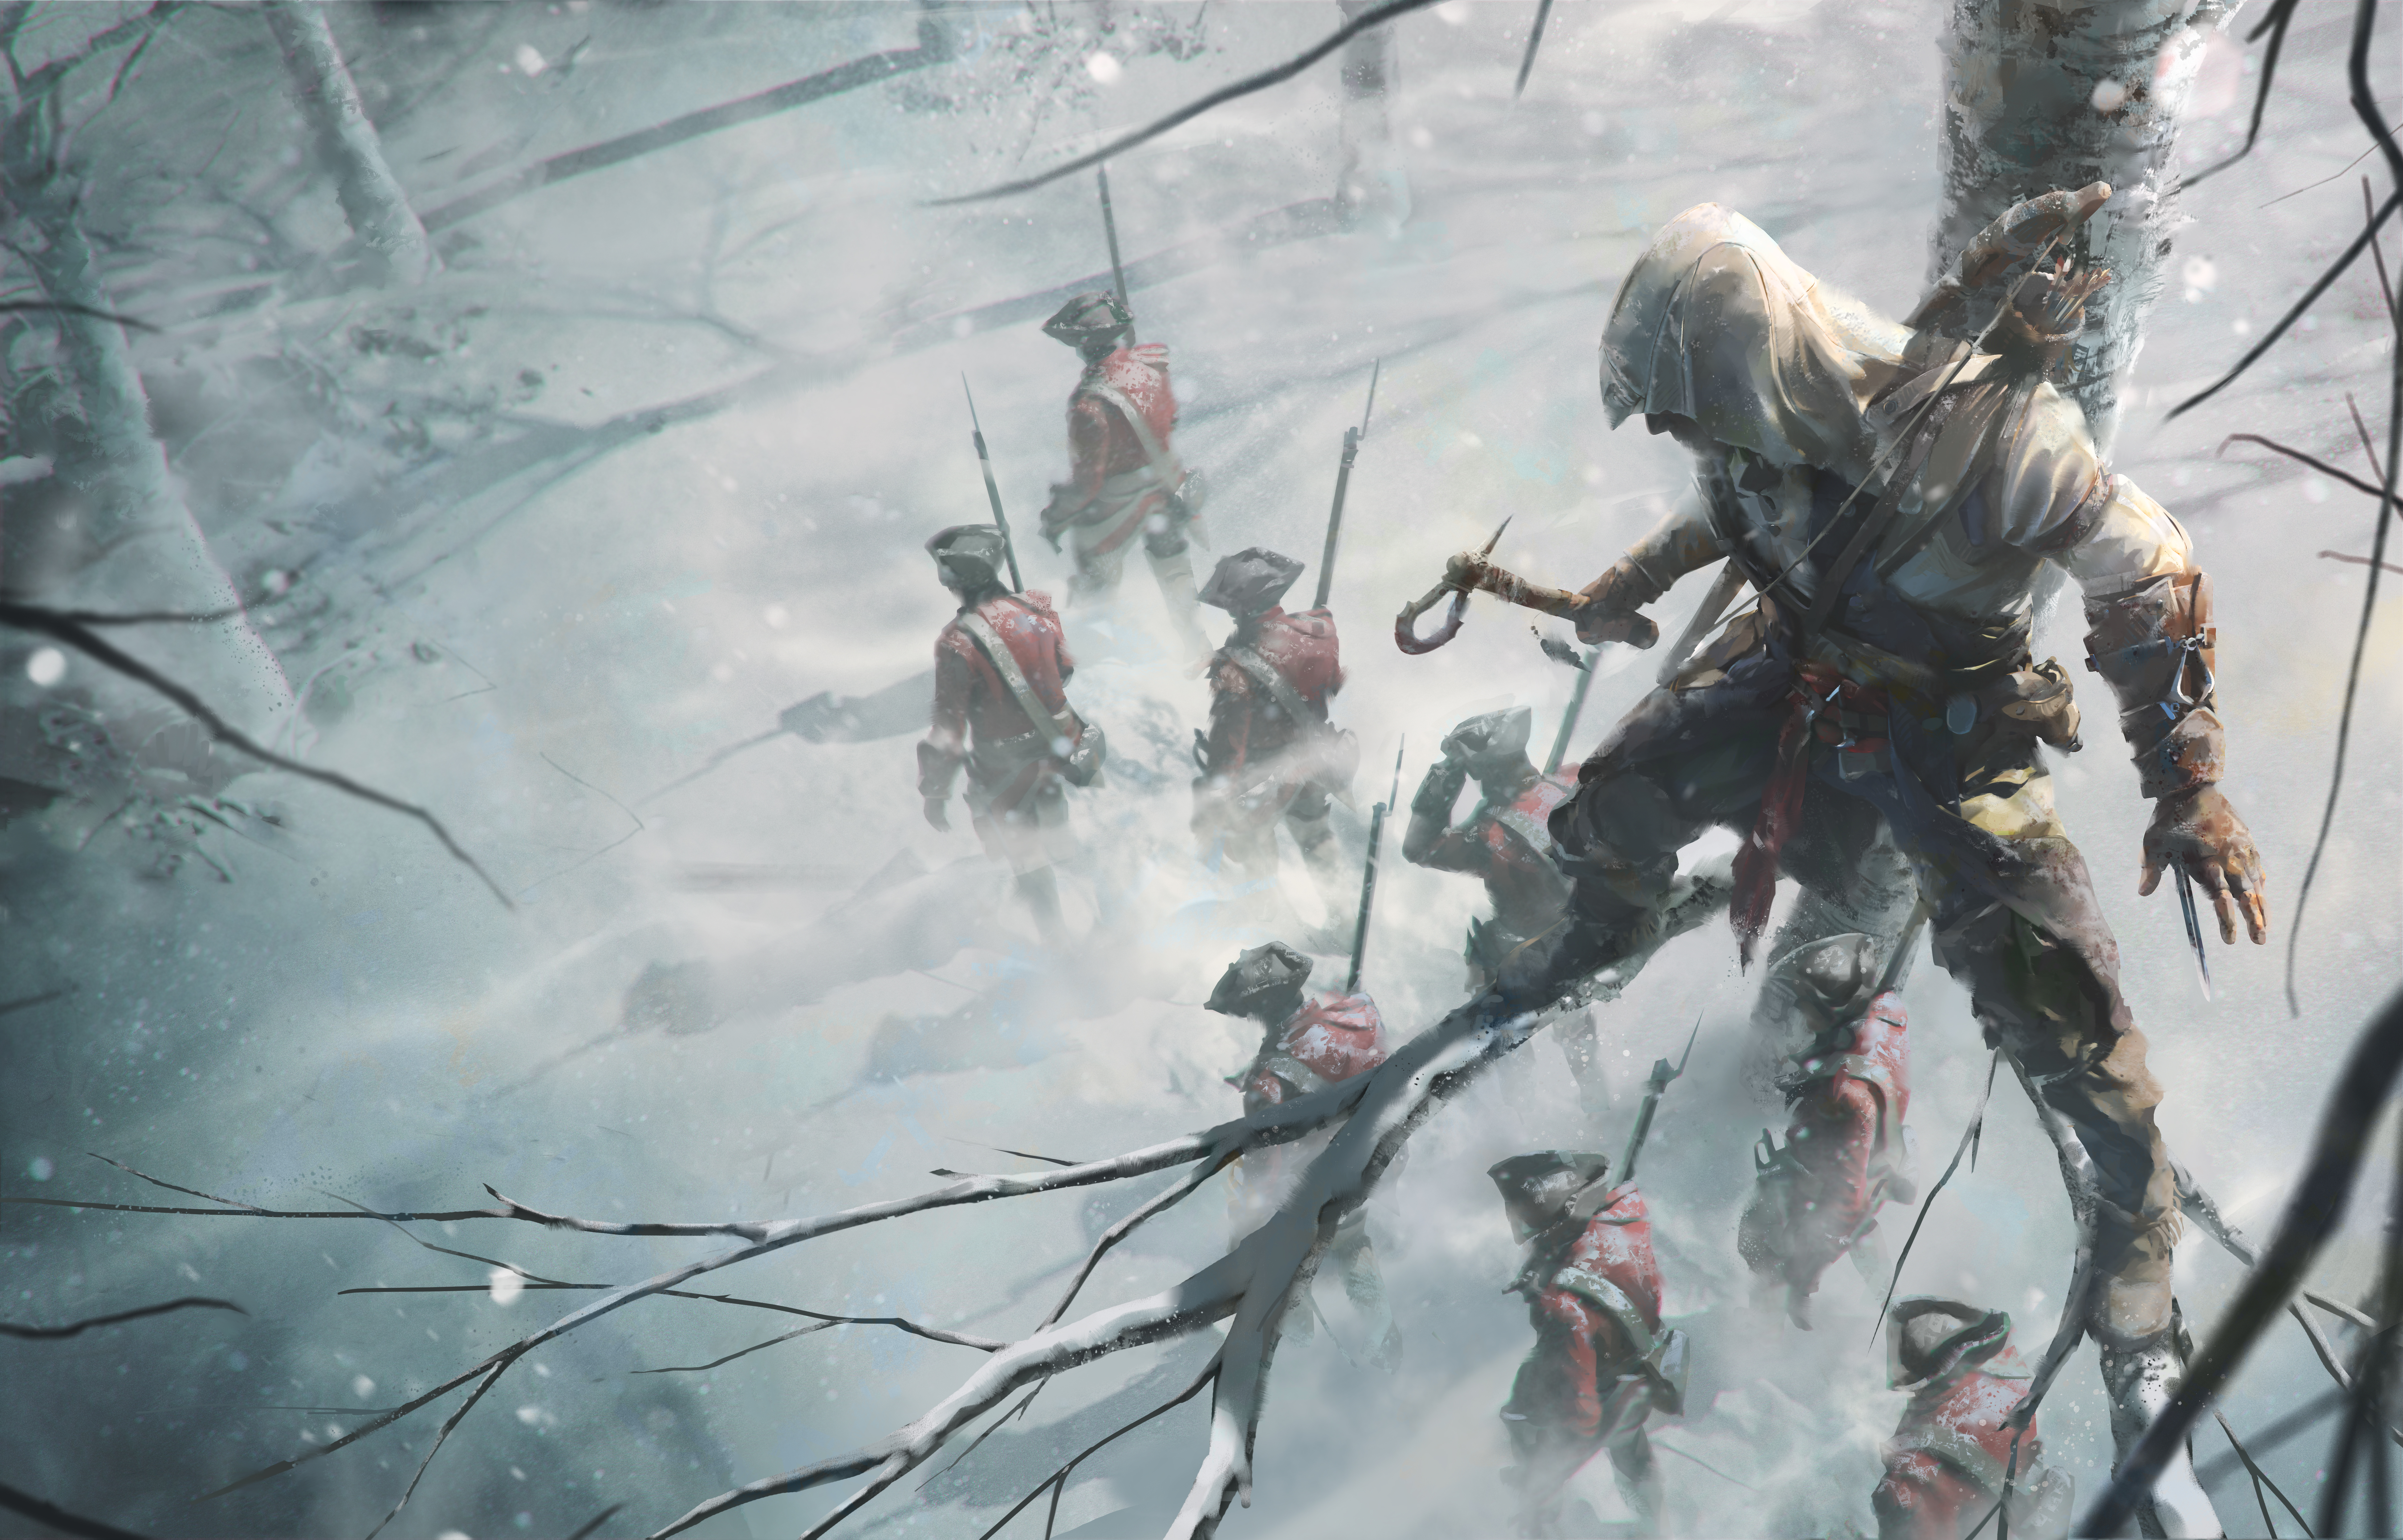 HD wallpaper assassin's creed, video game, assassin's creed iii, connor (assassin's creed), soldier, warrior